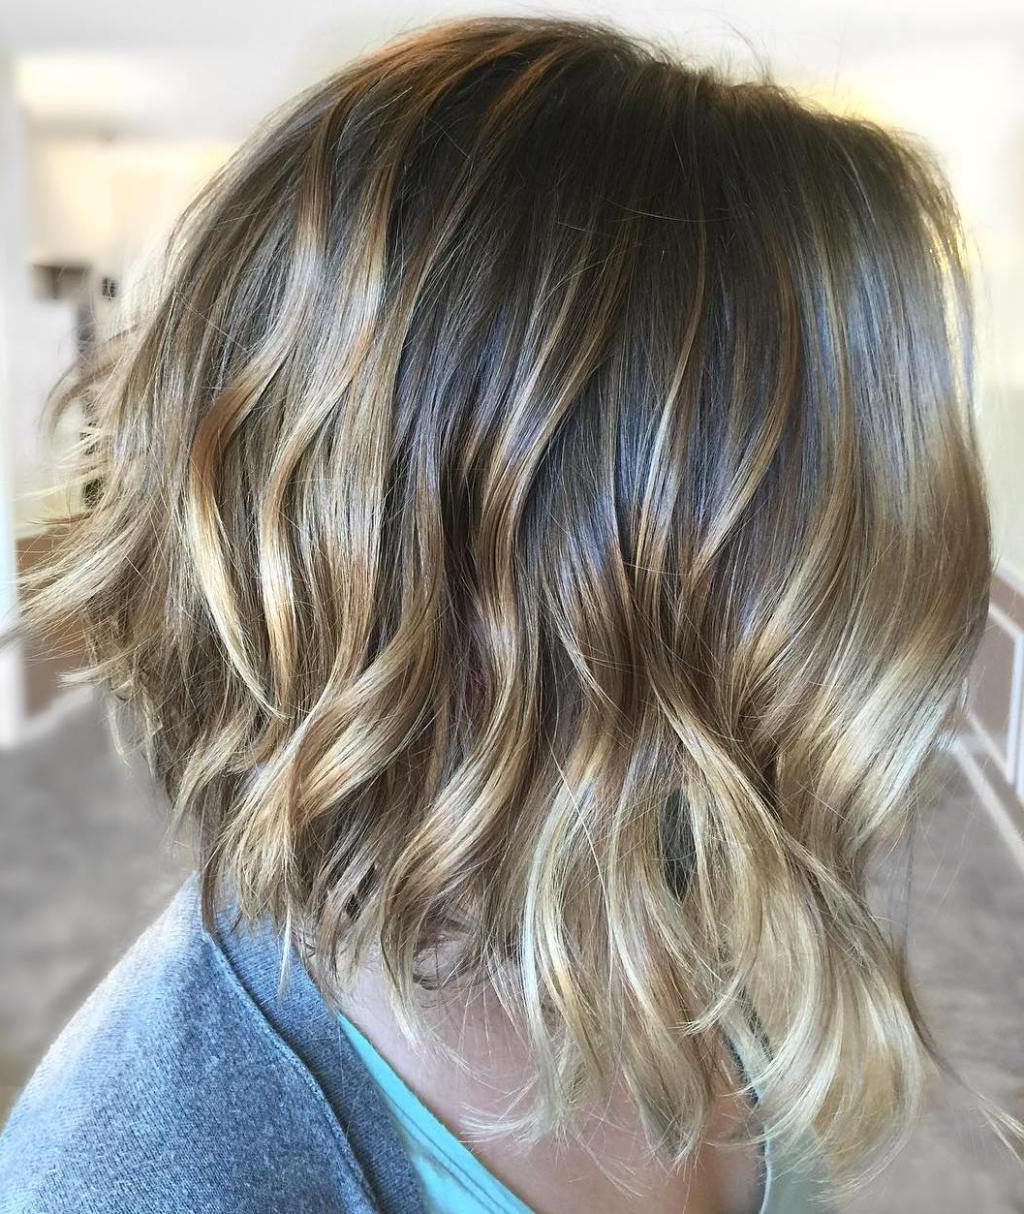 50 Gorgeous Wavy Bob Hairstyles With An Extra Touch Of Femininity Regarding Golden Brown Thick Curly Bob Hairstyles (View 3 of 25)